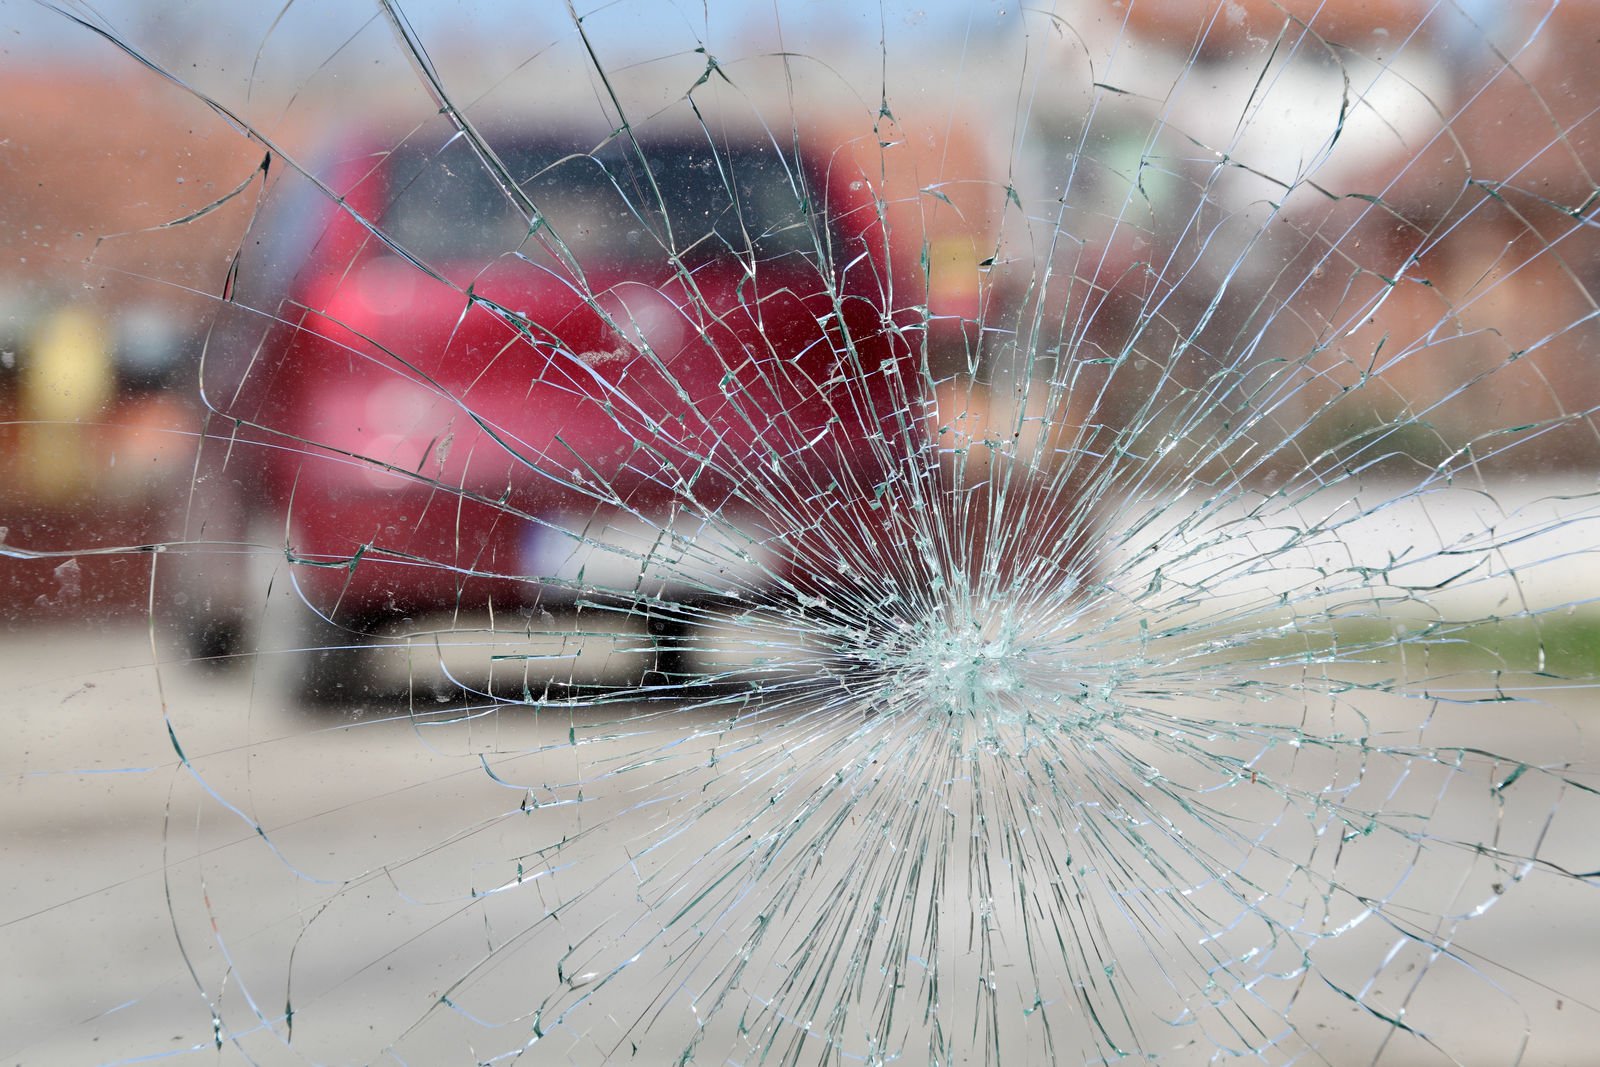 Delaware Windshield Replacement Insurance: What are the Full Glass coverage laws in Delaware?